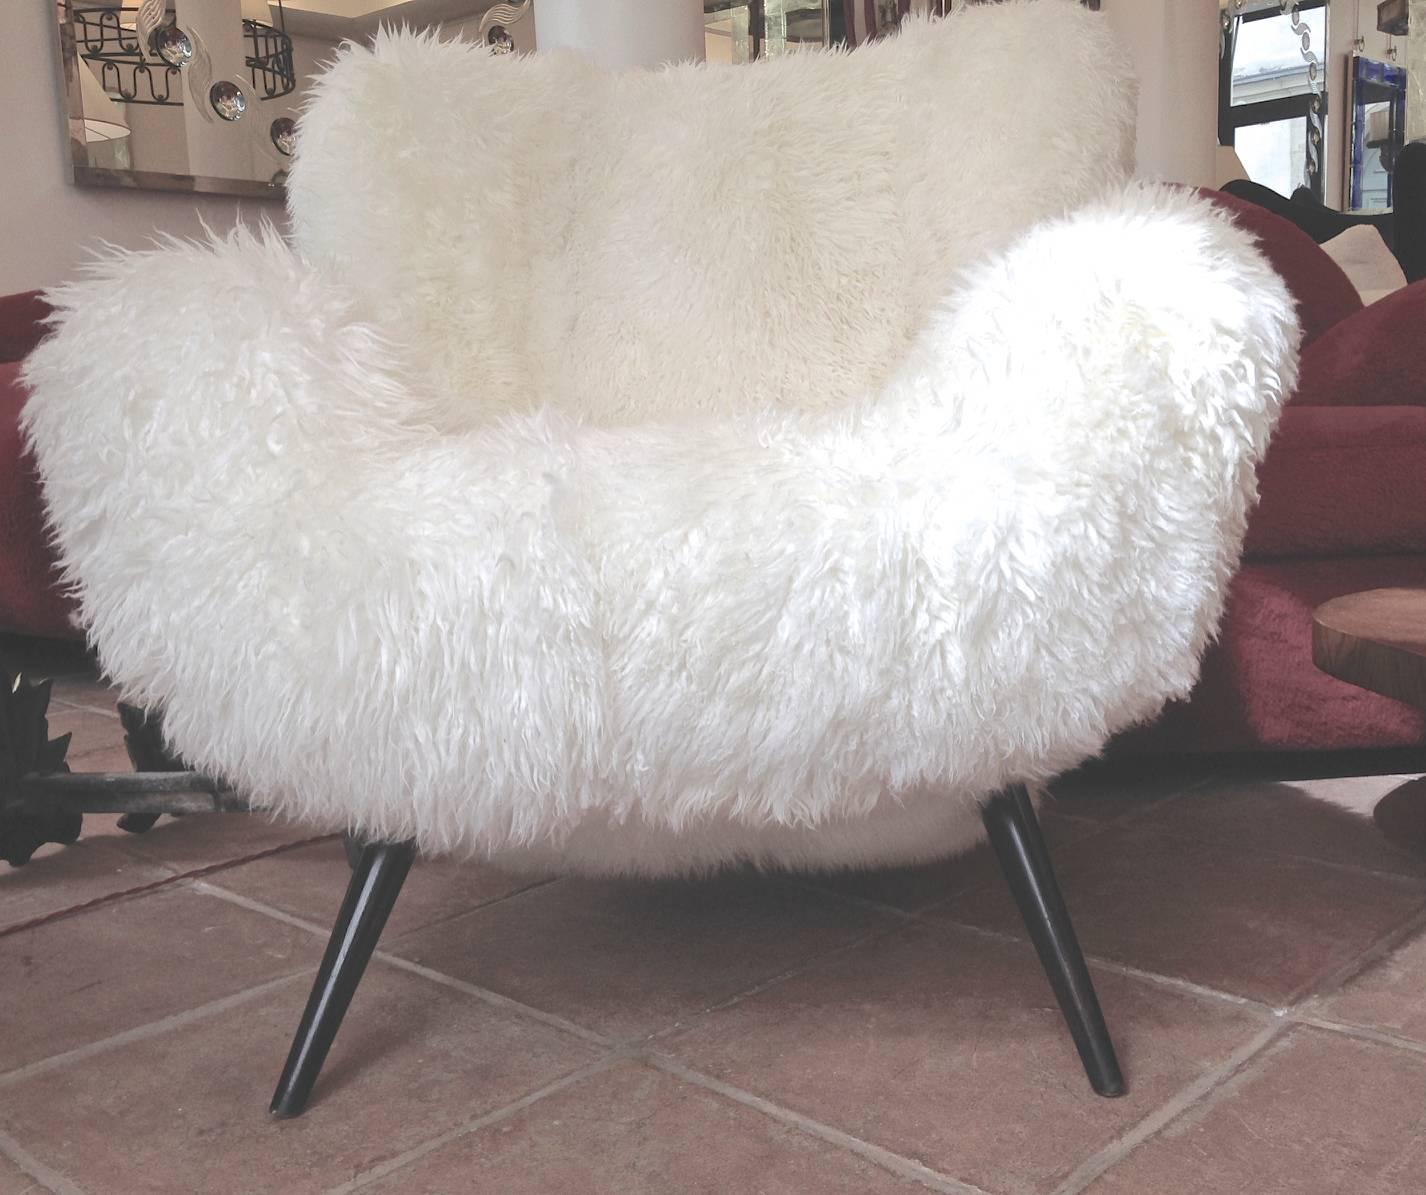 Mid-20th Century Fritz Neth Rarest Spectacular Wood Legged Lounge Chairs Covered in Sheepskin Fur For Sale